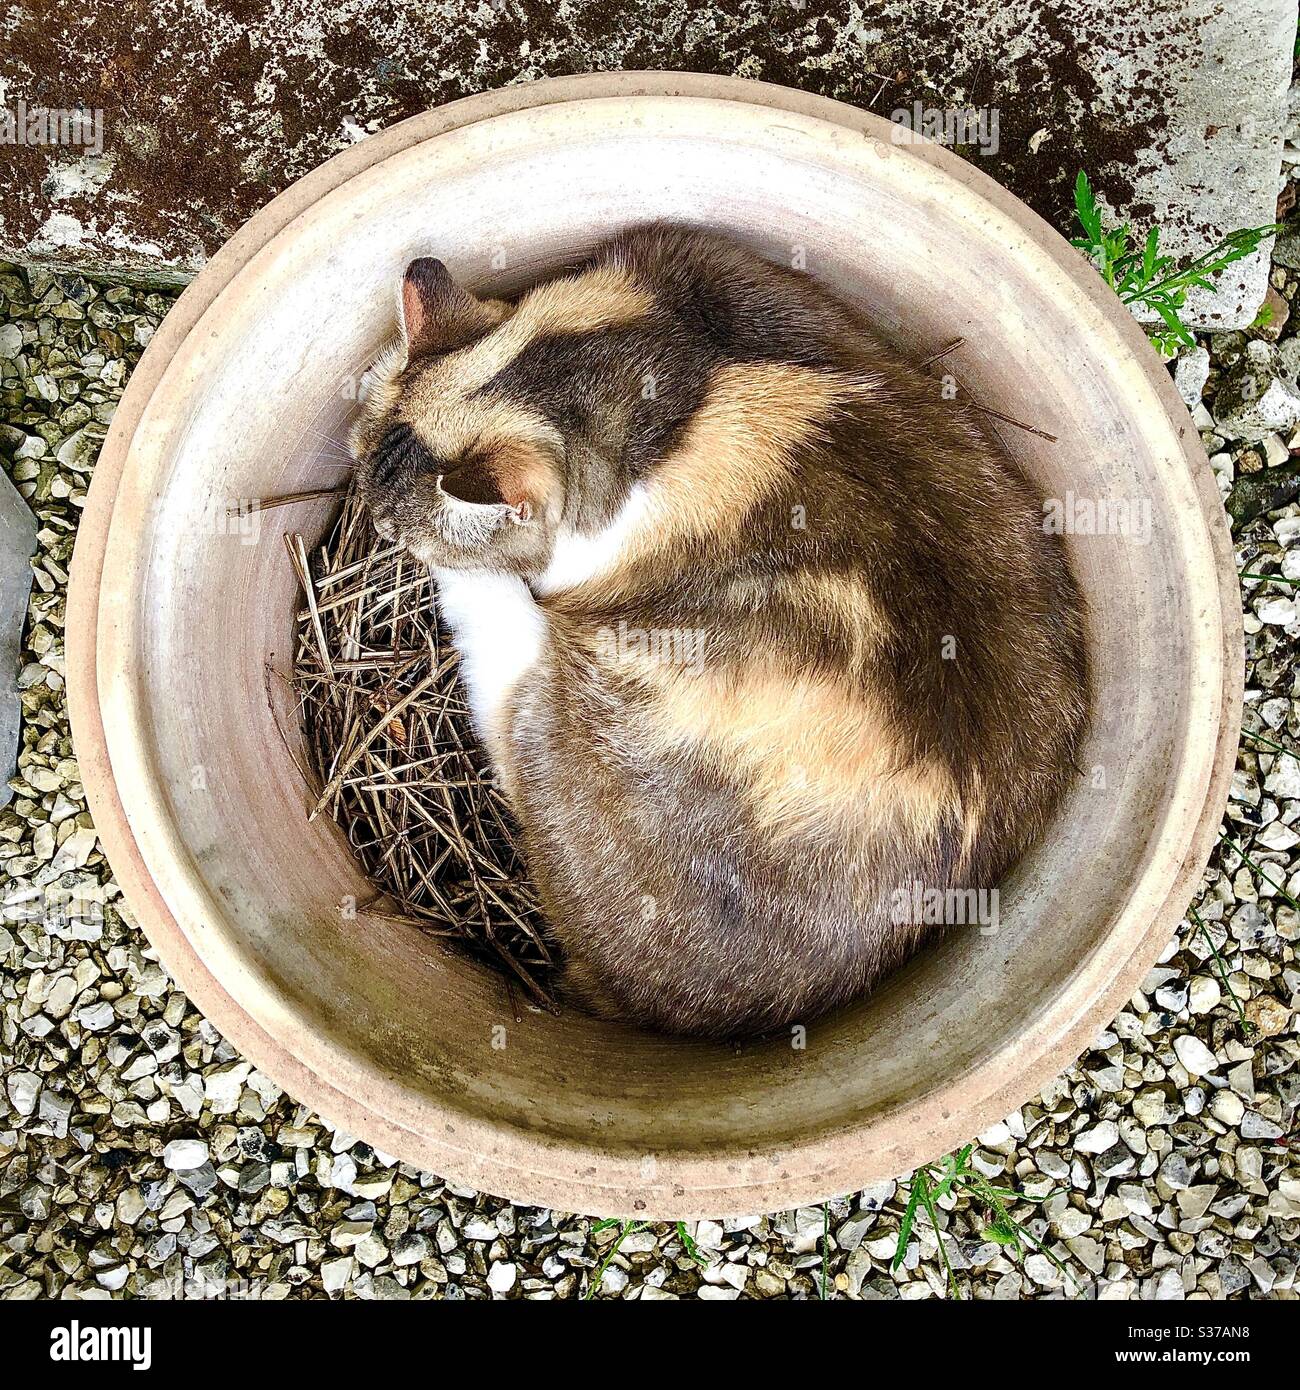 Tortoiseshell cat curled up and asleep in large garden urn. Stock Photo